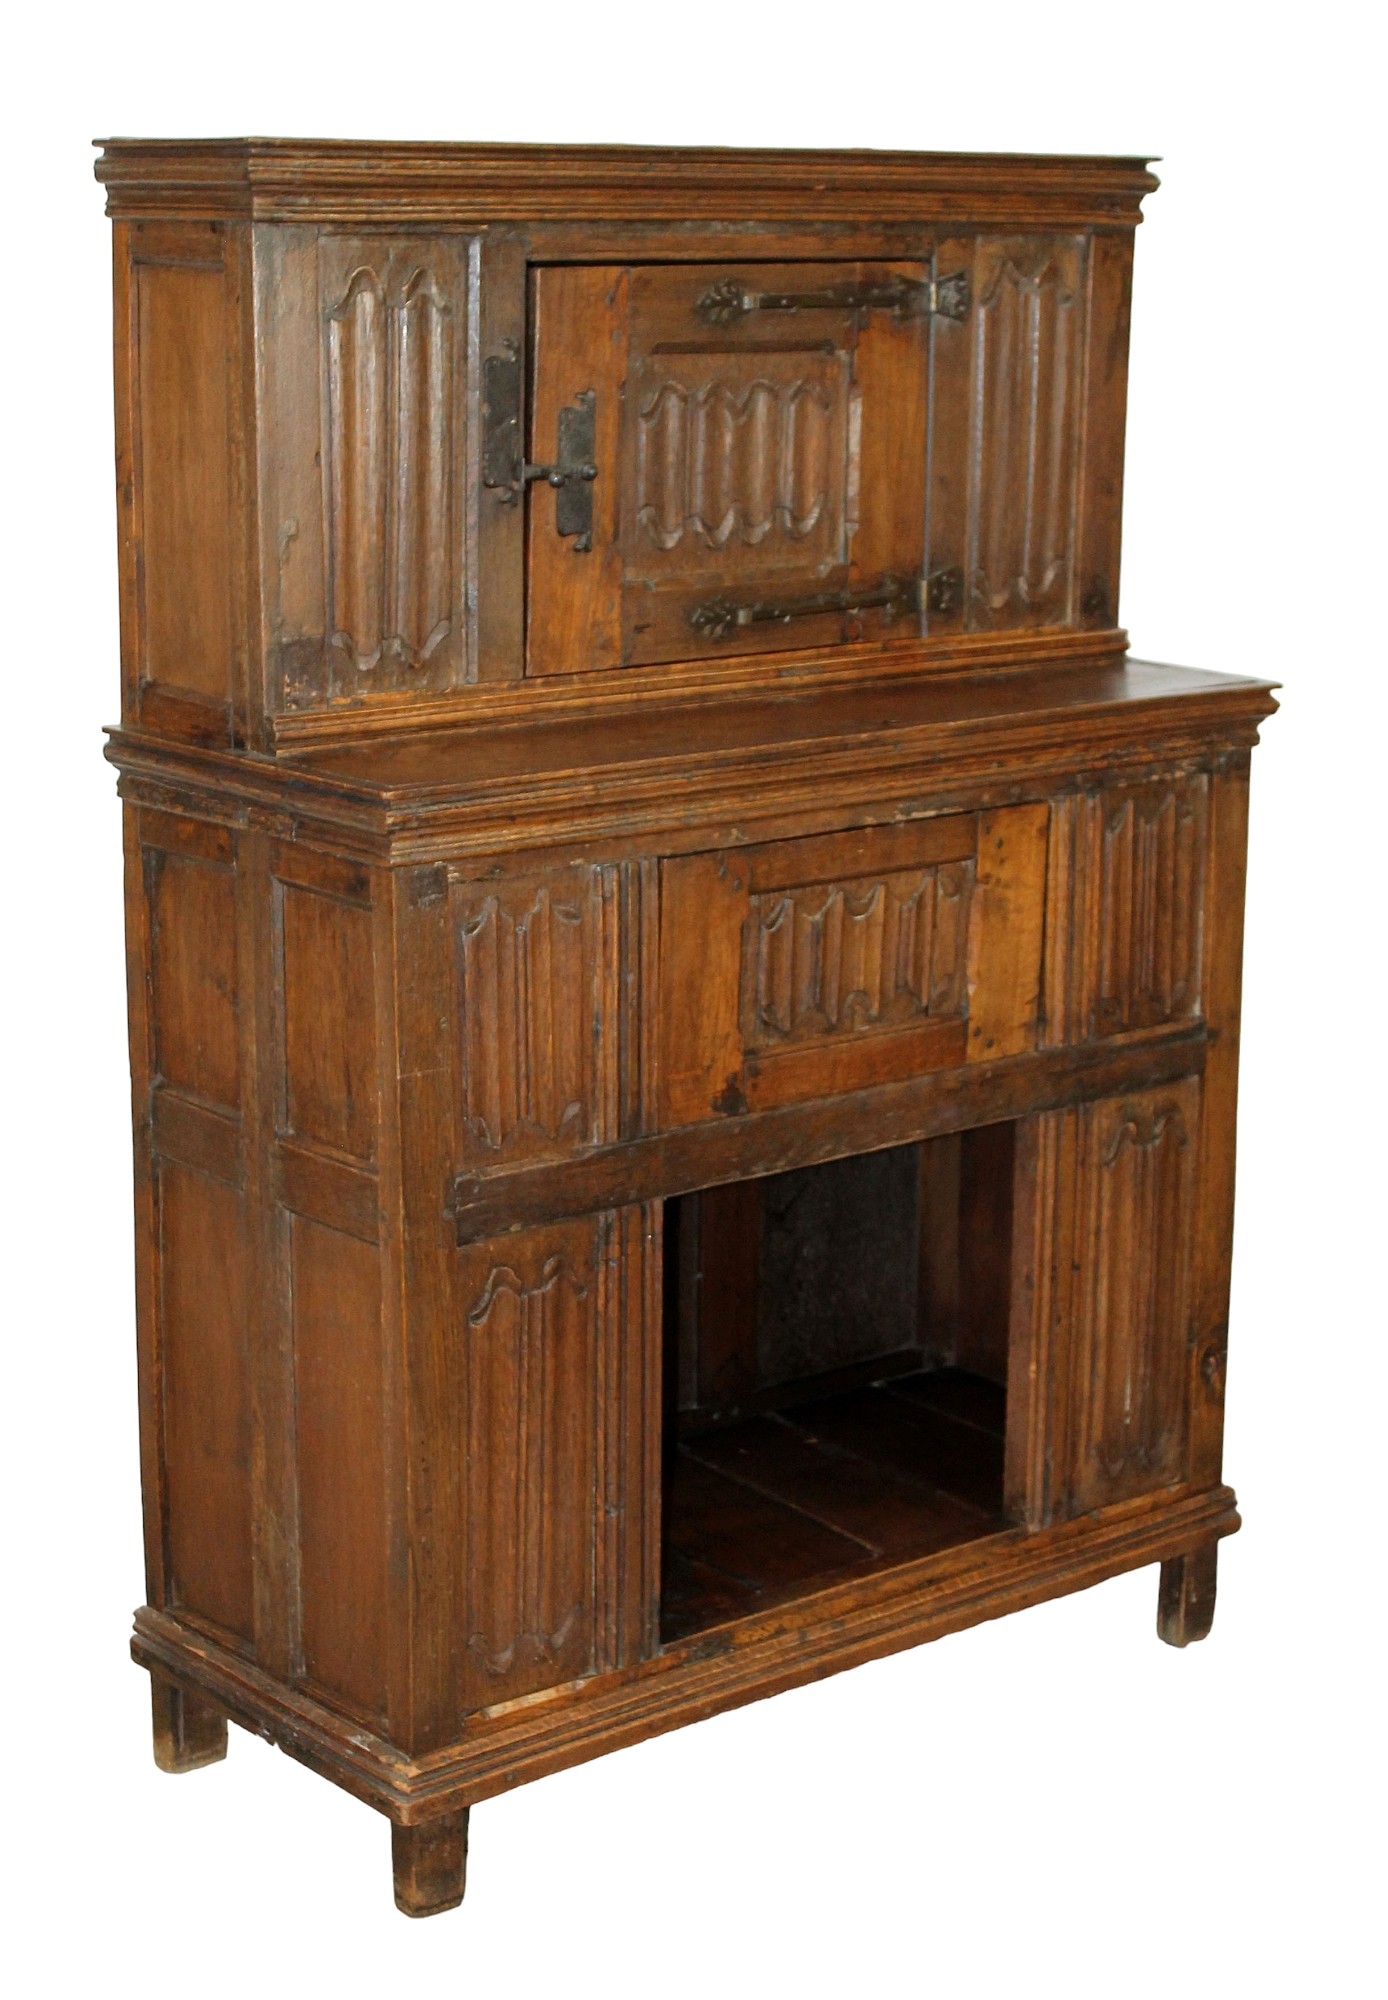 French Gothic revival oak cabinet